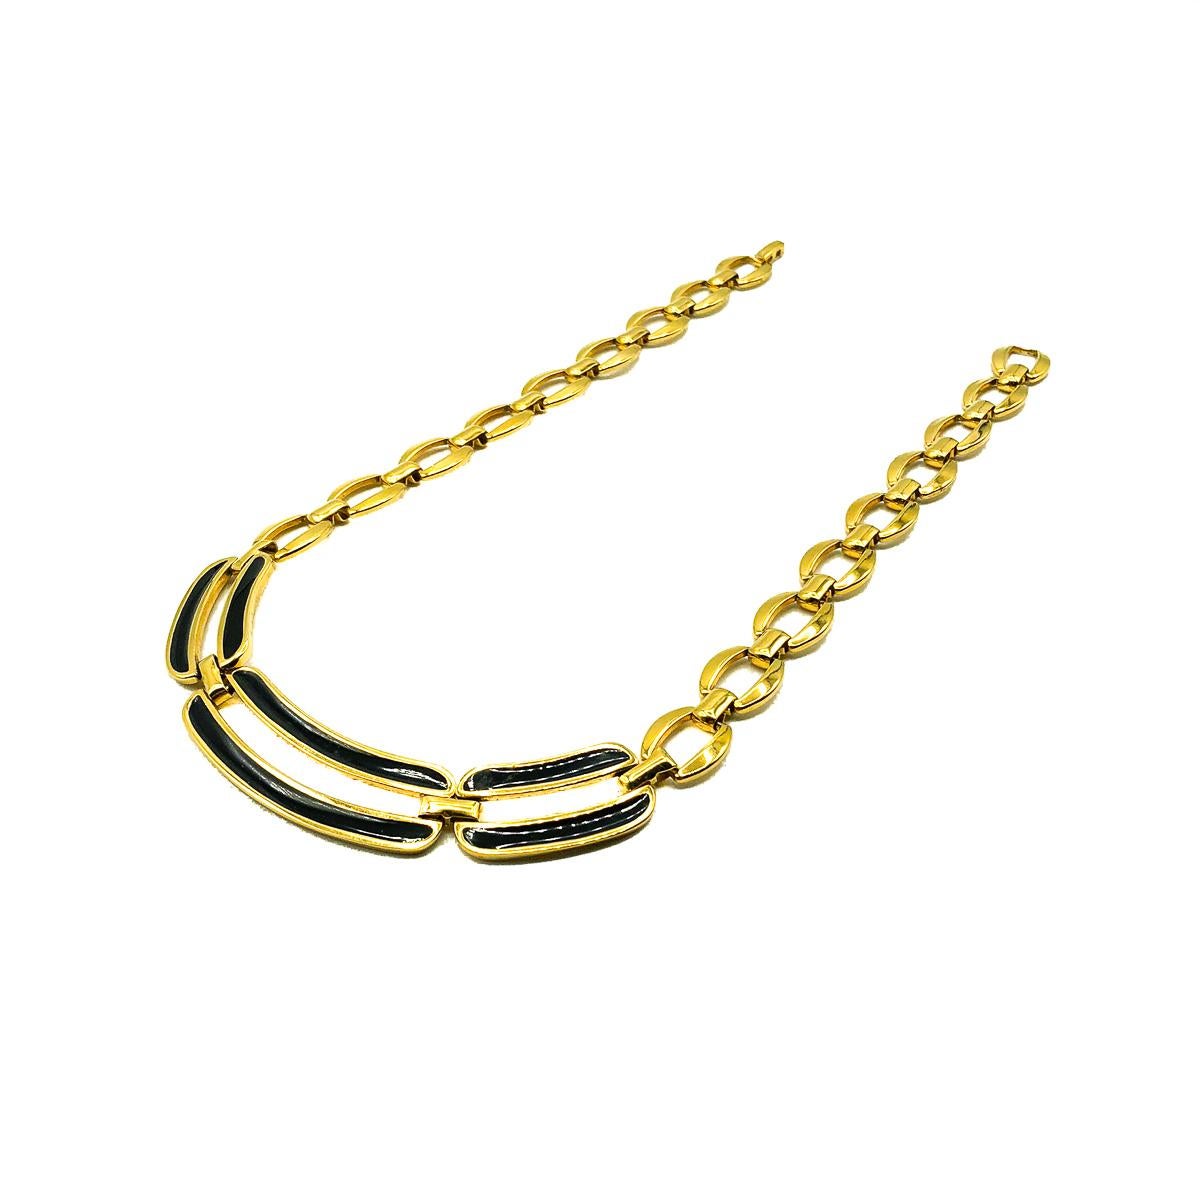 A classic Vintage Napier Bar Necklace. Crafted in gold plated metal with black enamel. In very good vintage condition, approx. 43cms. Signed. An eternal high performer in the jewel stakes. 

Established in 2016, this is a British brand that is